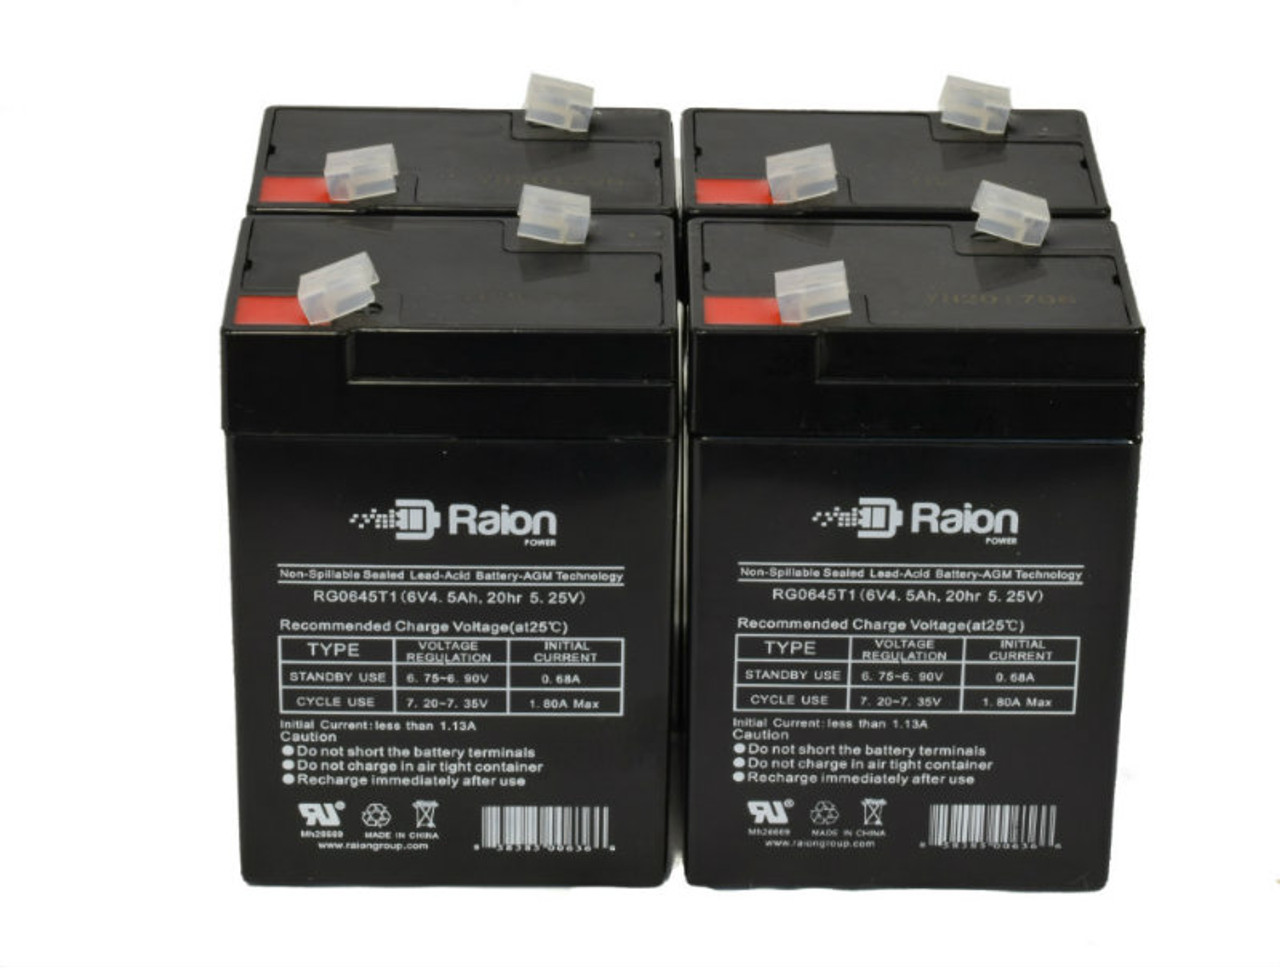 Raion Power 6V 4.5Ah Replacement Emergency Light Battery for Tork CYL1LA - 4 Pack